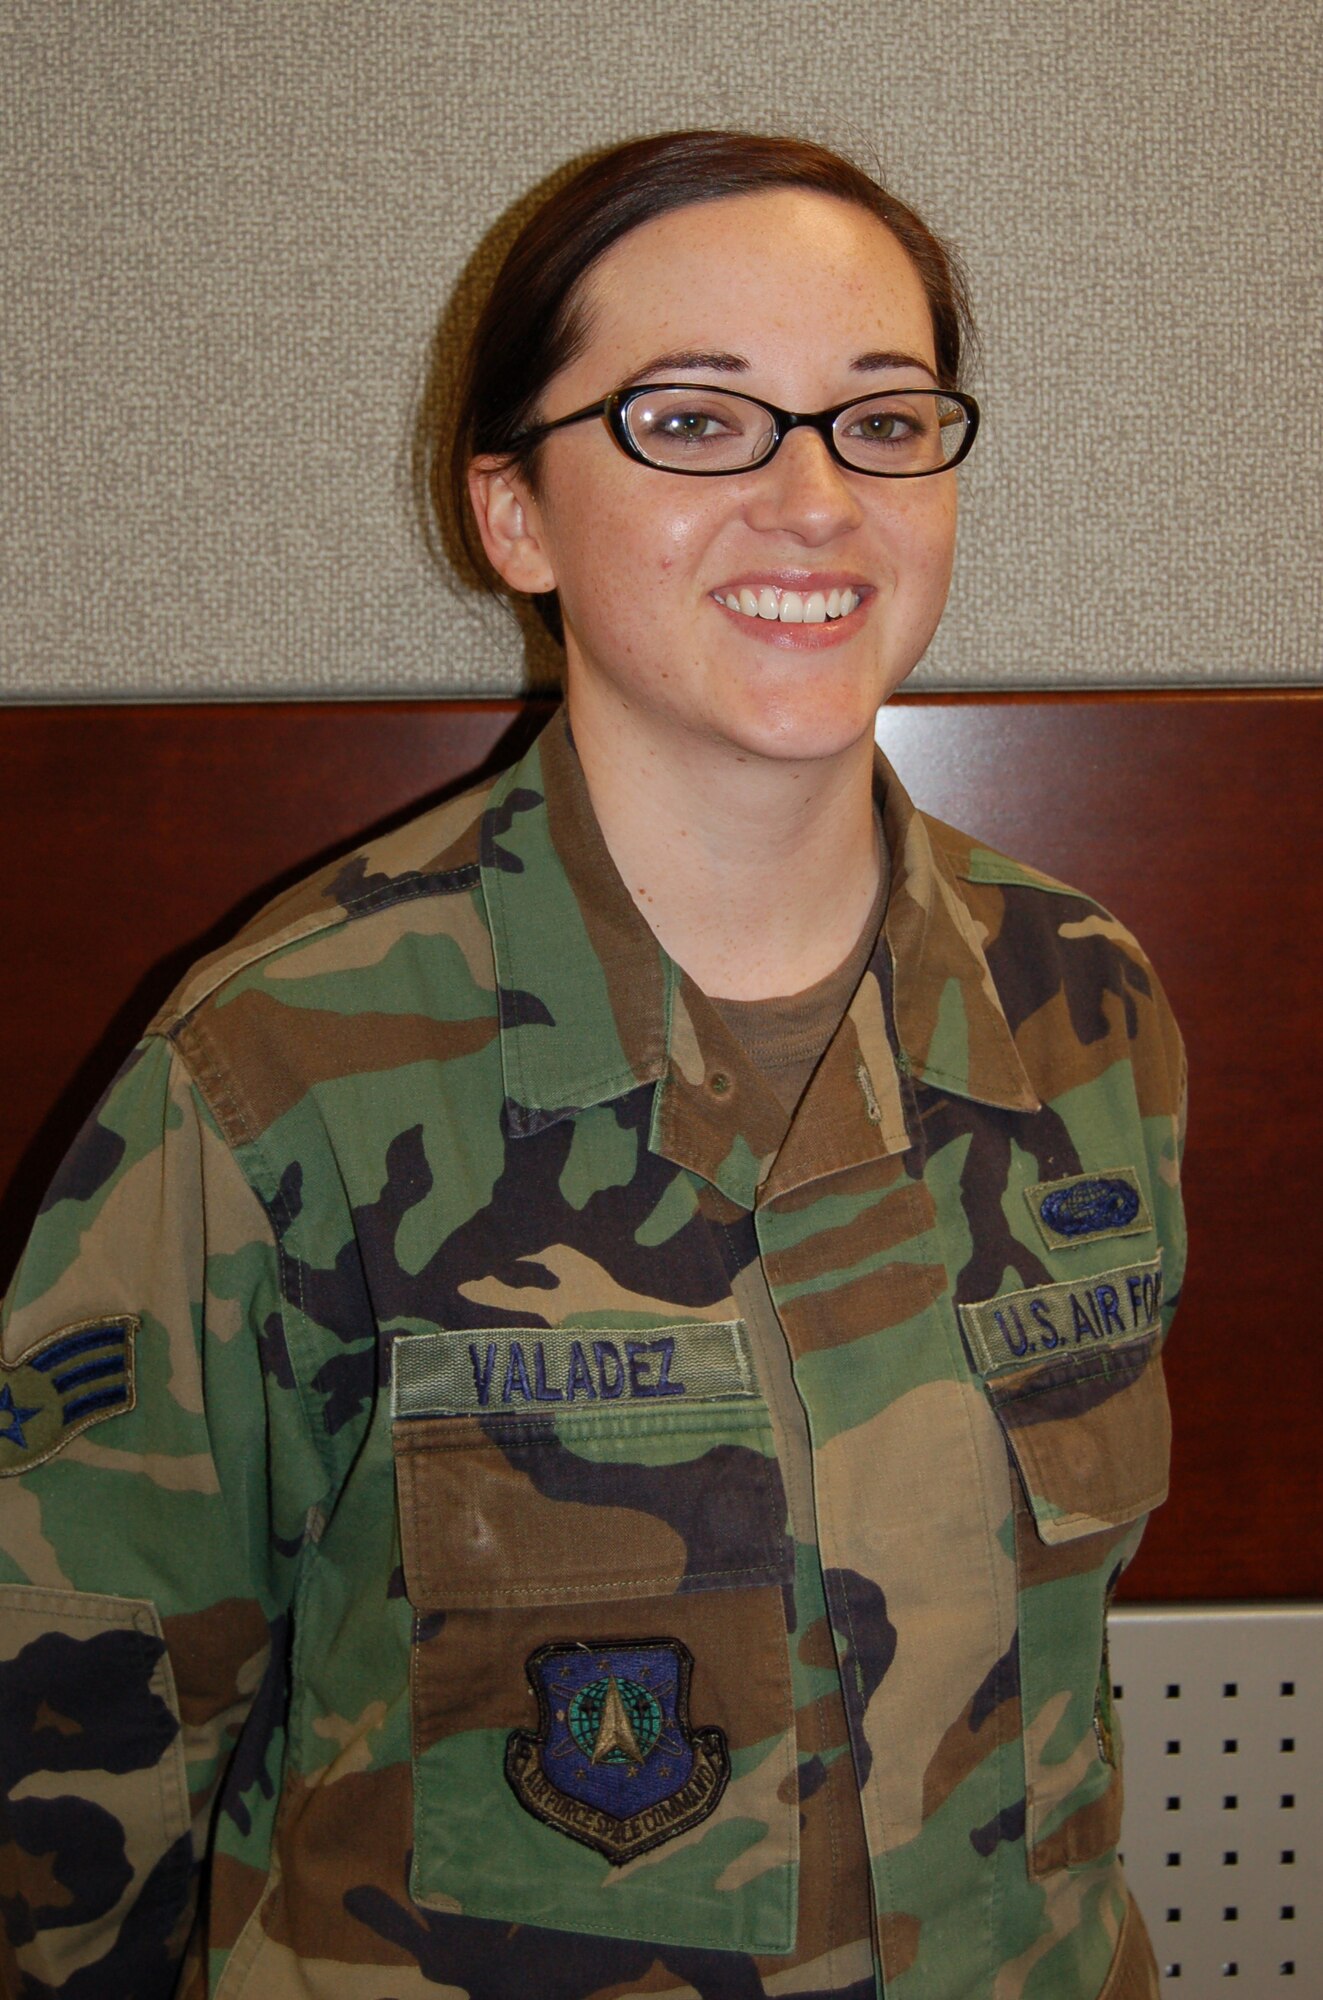 Senior Airman Amanda Valadez hails from Ogden, Utah. She is a personnelist in the 460th Operations Group Commander's Support Staff. (U.S. Air Force photo by Senior Airman Jacque Lickteig)